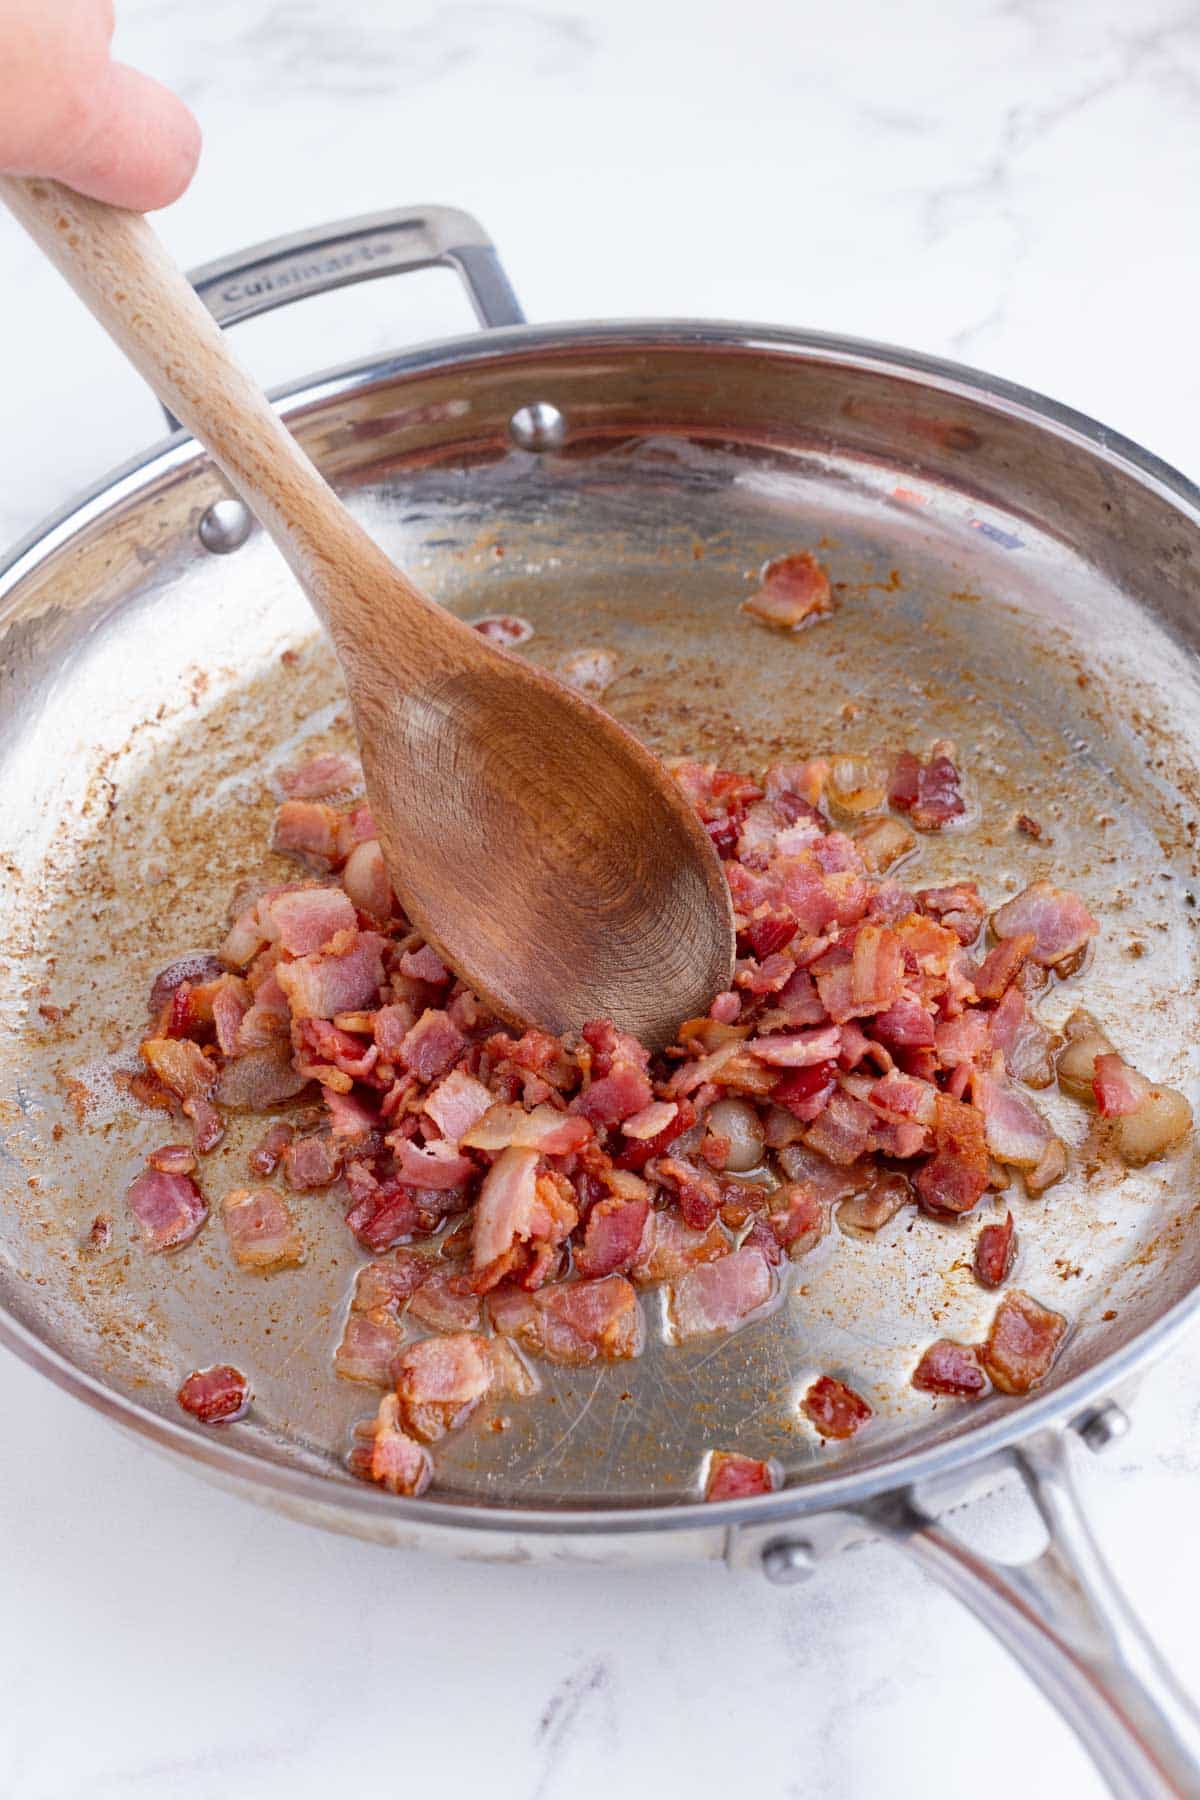 Bacon is cooked in a skillet.